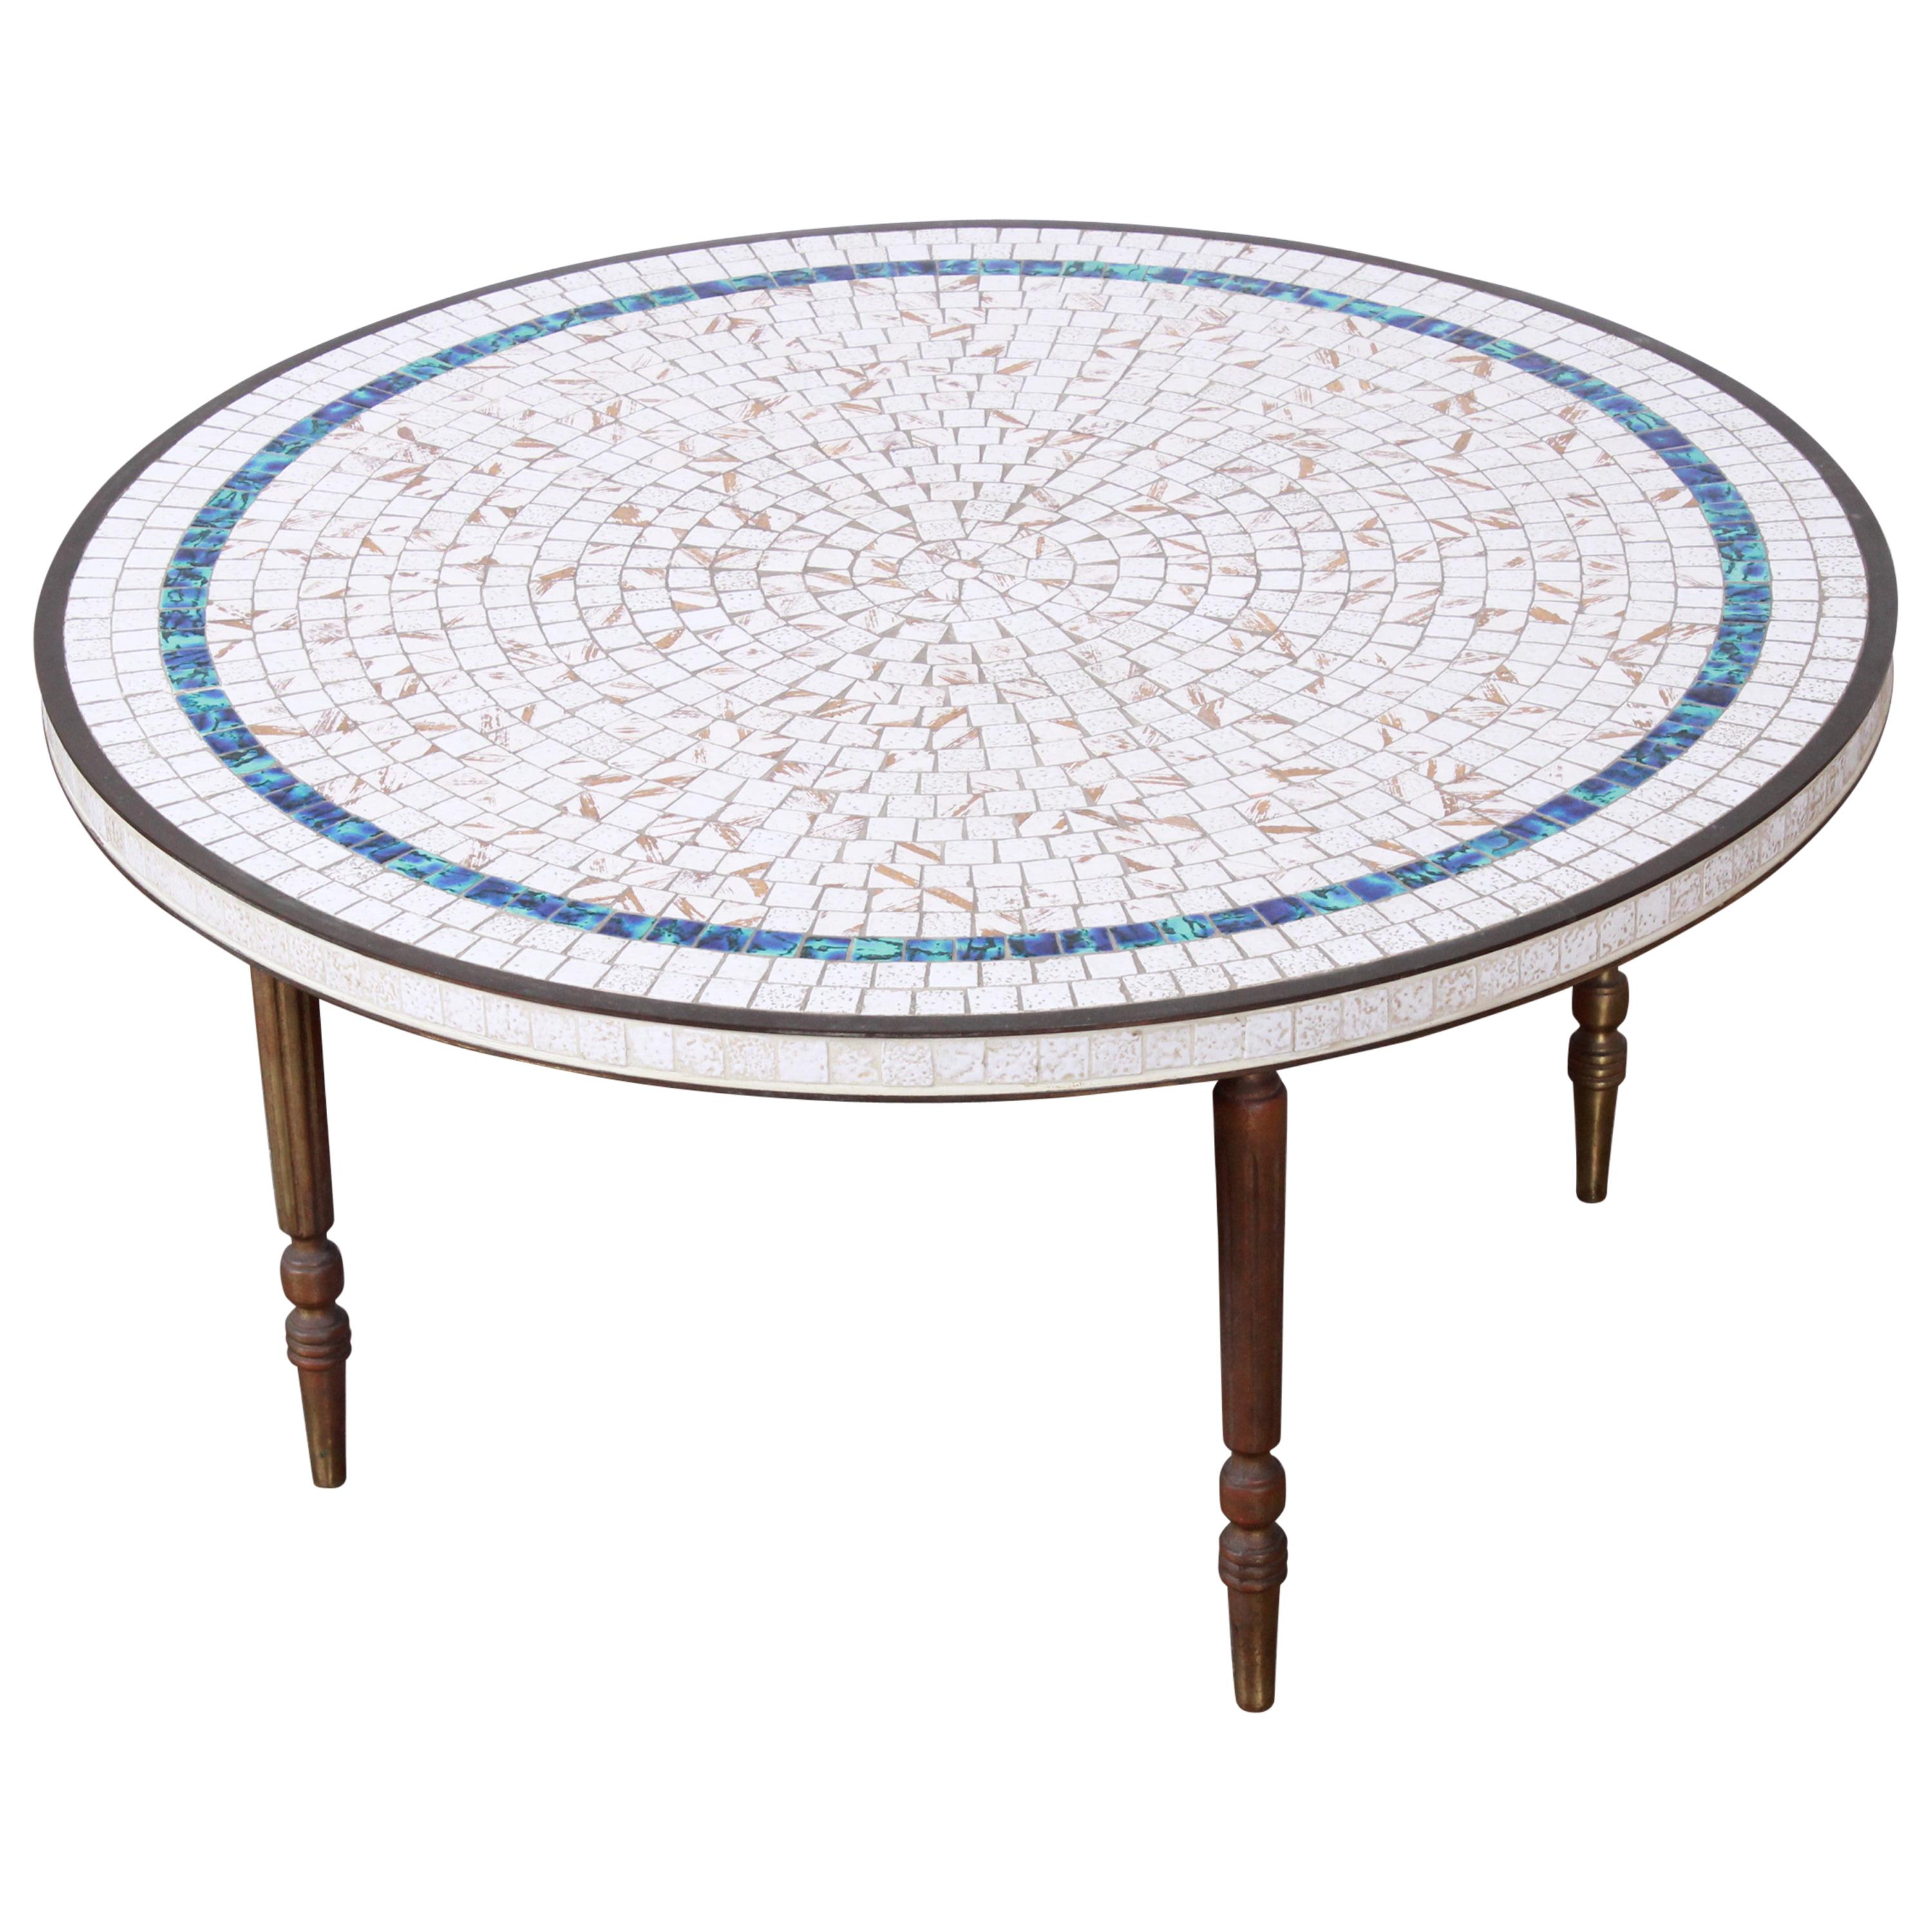 Italian Mid-Century Modern Mosaic Tile and Brass Cocktail Table, 1950s